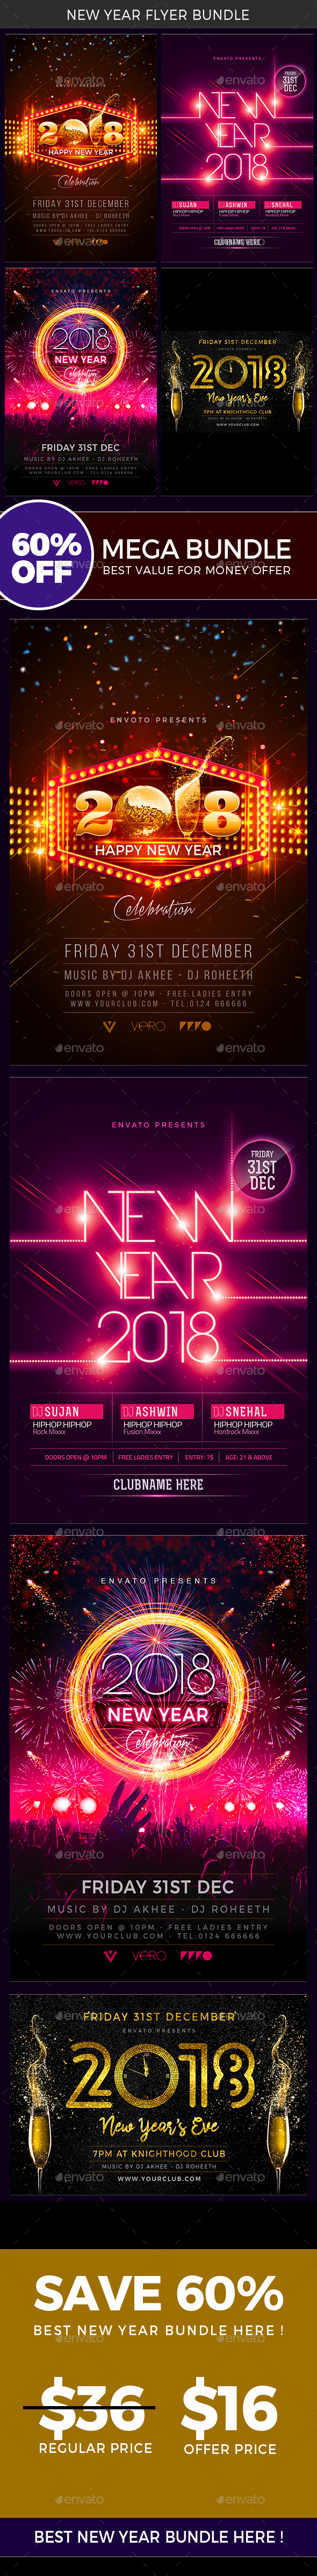 GraphicRiver New Year Bundle 21112314